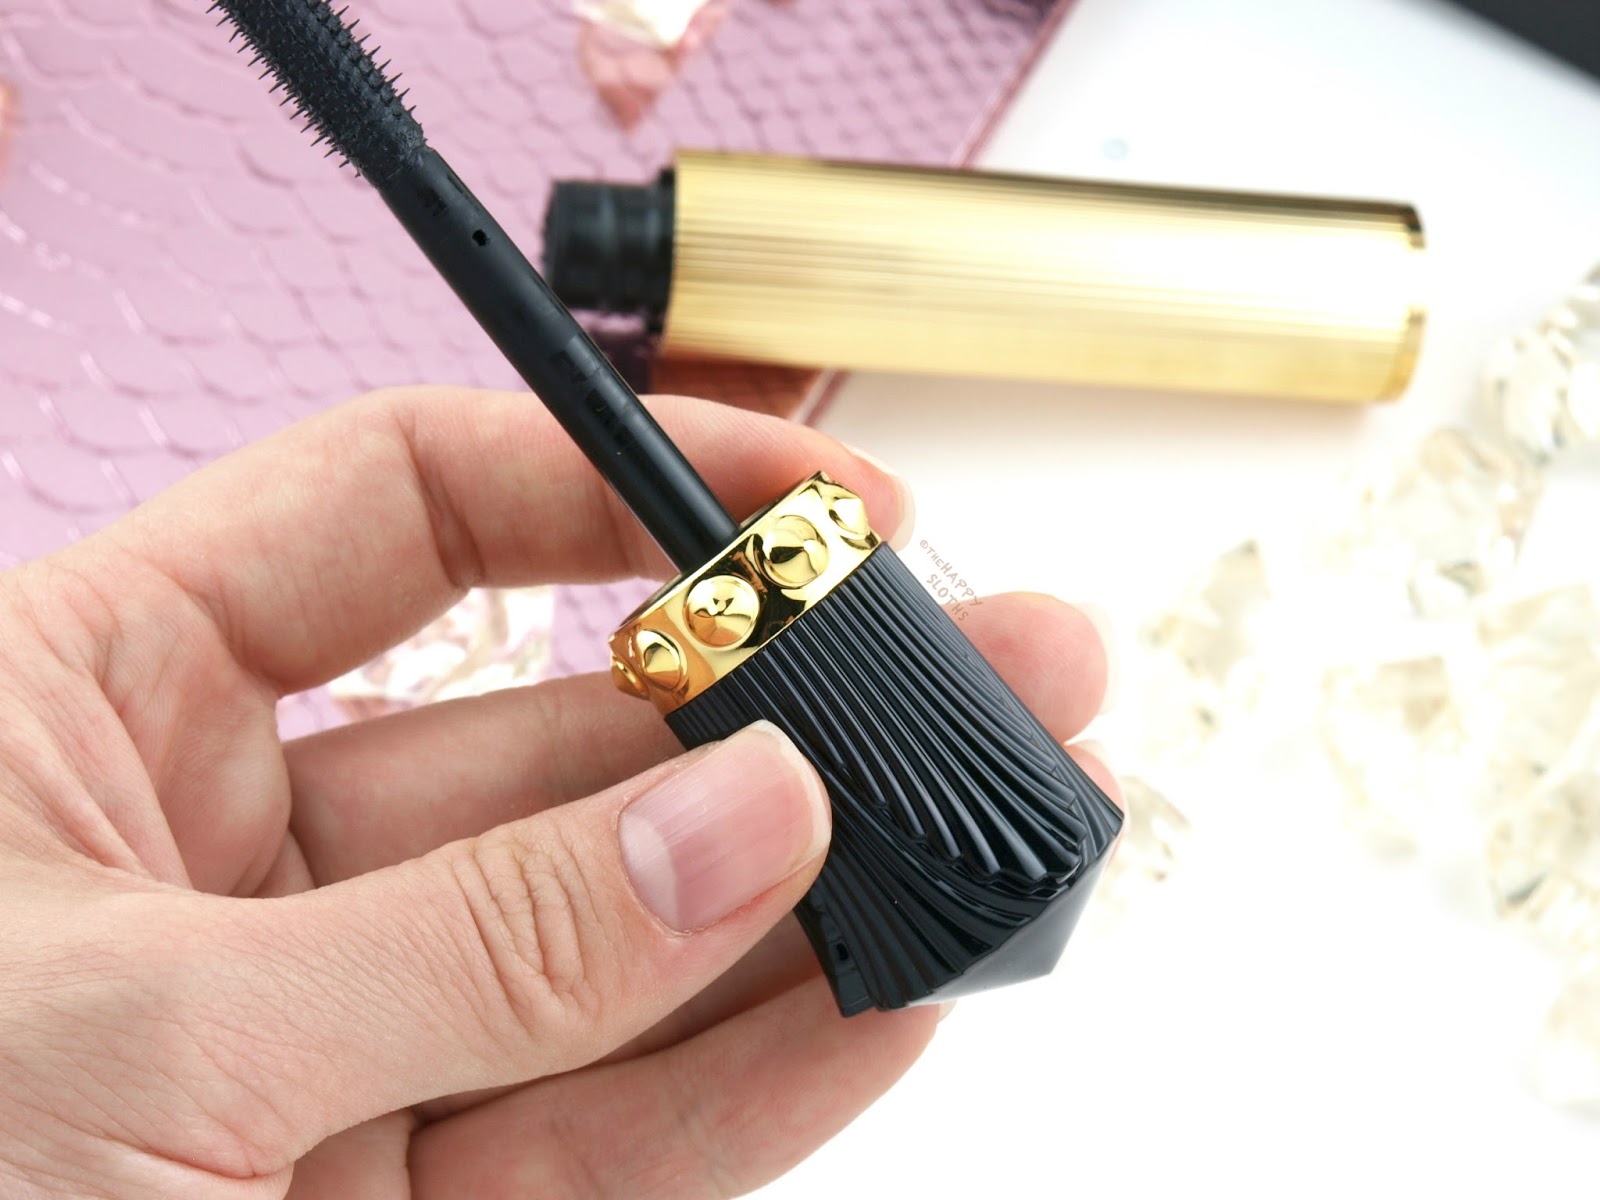 Christian Louboutin Les Yeux Noirs Lash Amplifying Lacquer Mascara: Review and Swatches